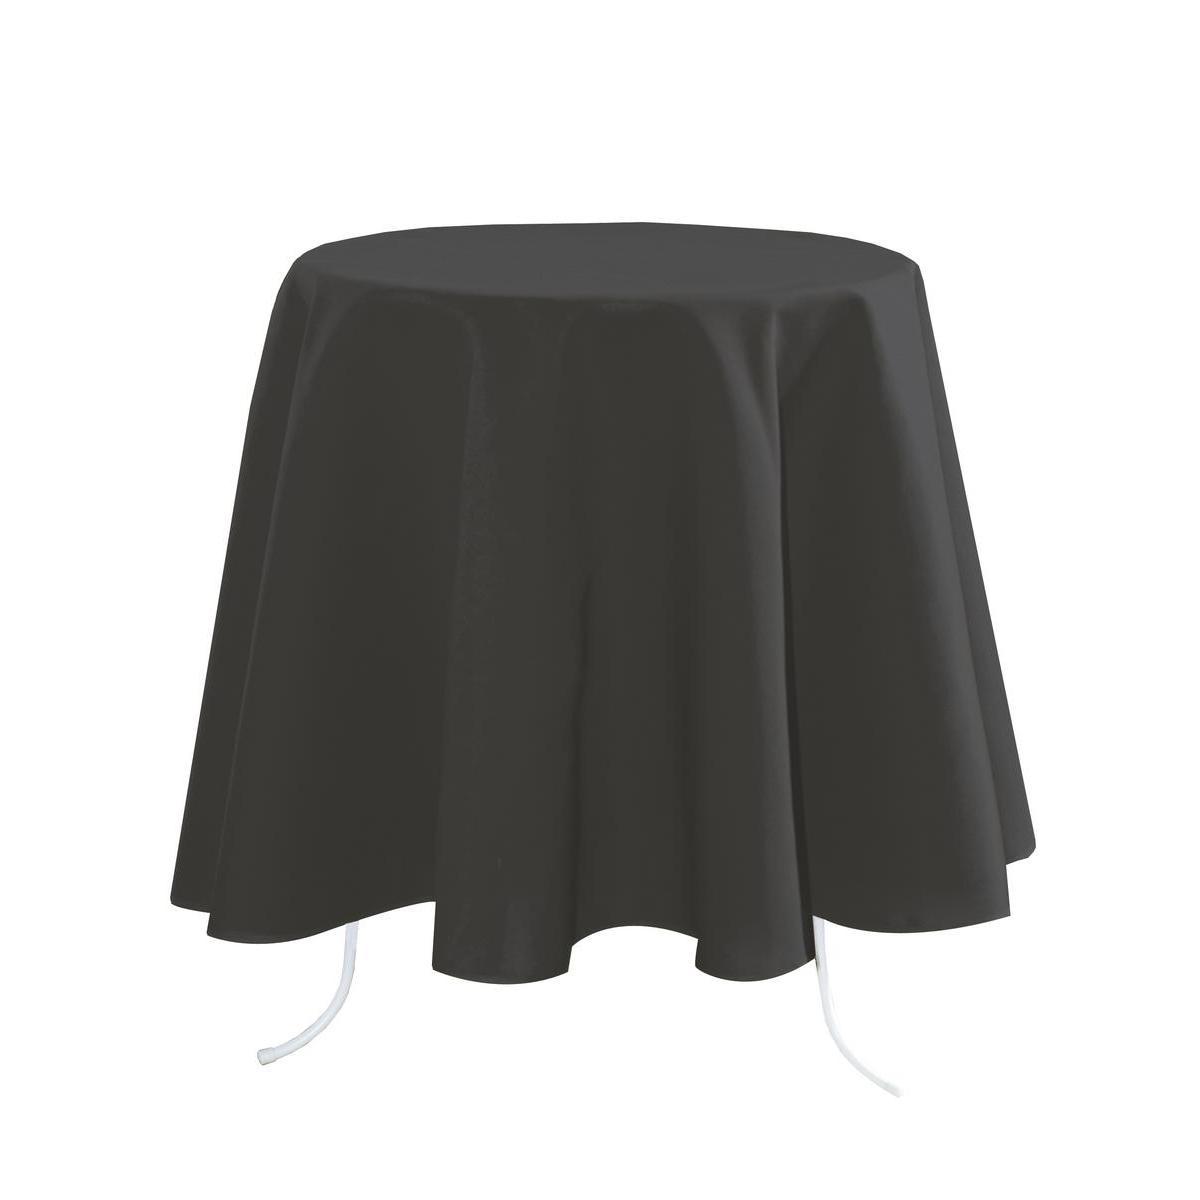 Nappe ronde - 100 % Polyester - Ø 160 cm - Gris anthracite